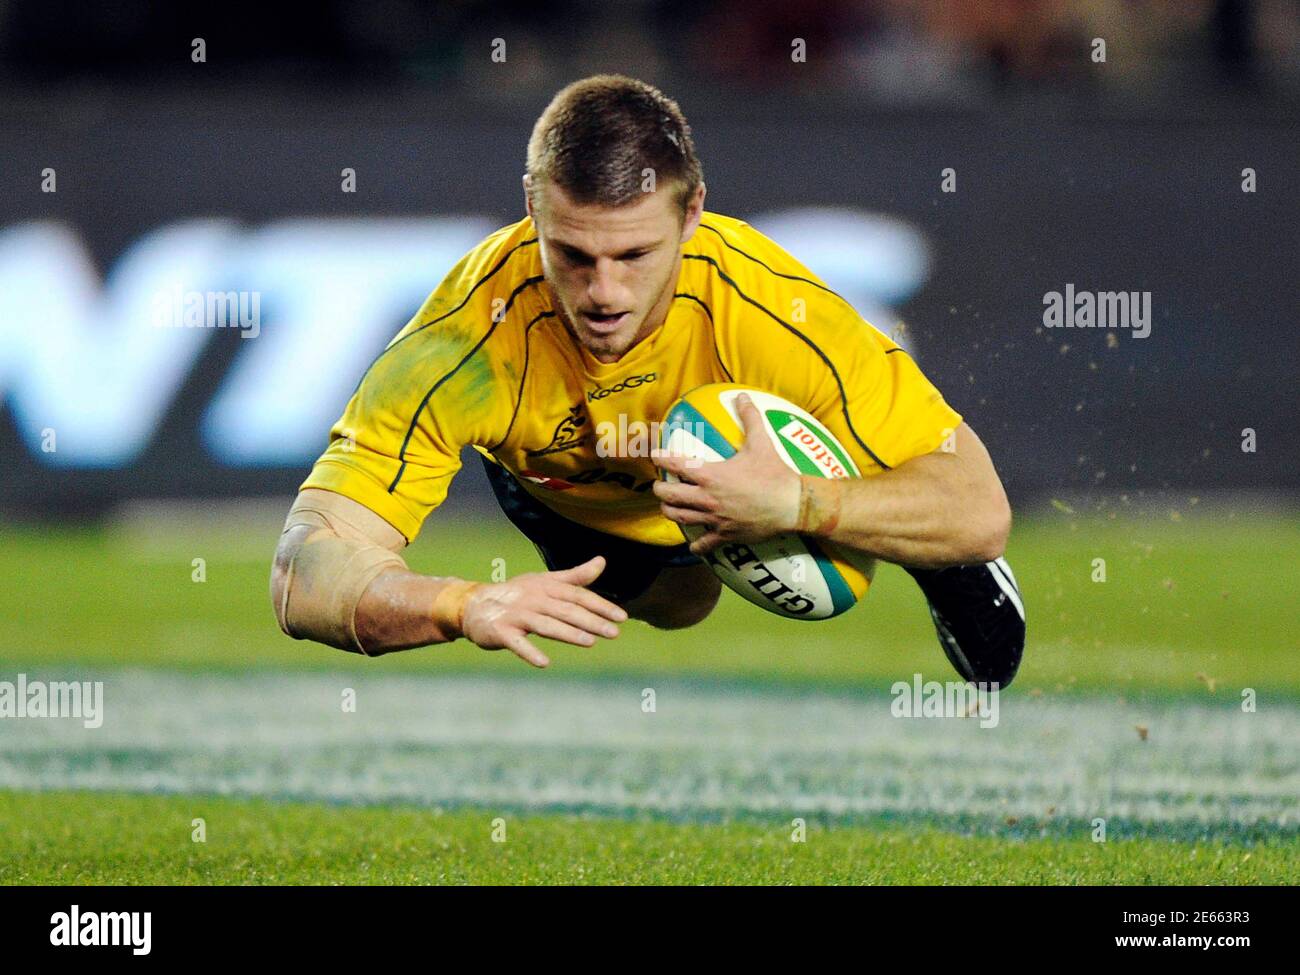 Australia's Rob Horne scores a try during their international rugby test match against Wales in Melbourne June 16, 2012. REUTERS/Mal Fairclough (AUSTRALIA - Tags: SPORT RUGBY) Stock Photo